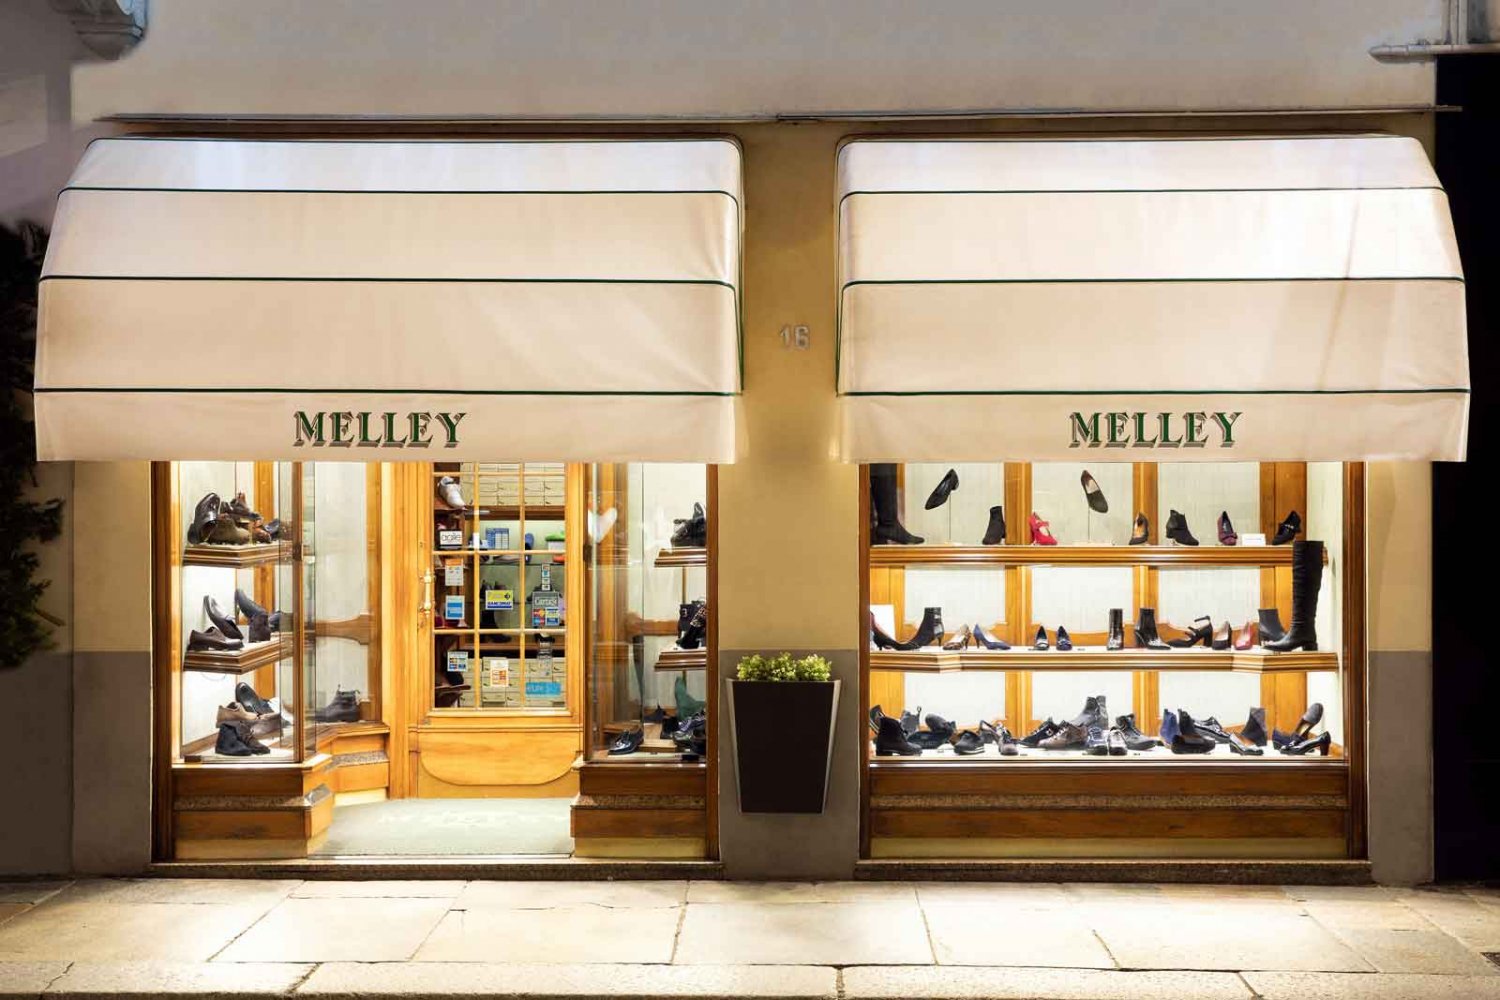 Calzature Melley - Historic shoes shop in Parma - Partners - Orizzonte  Italia Magazine